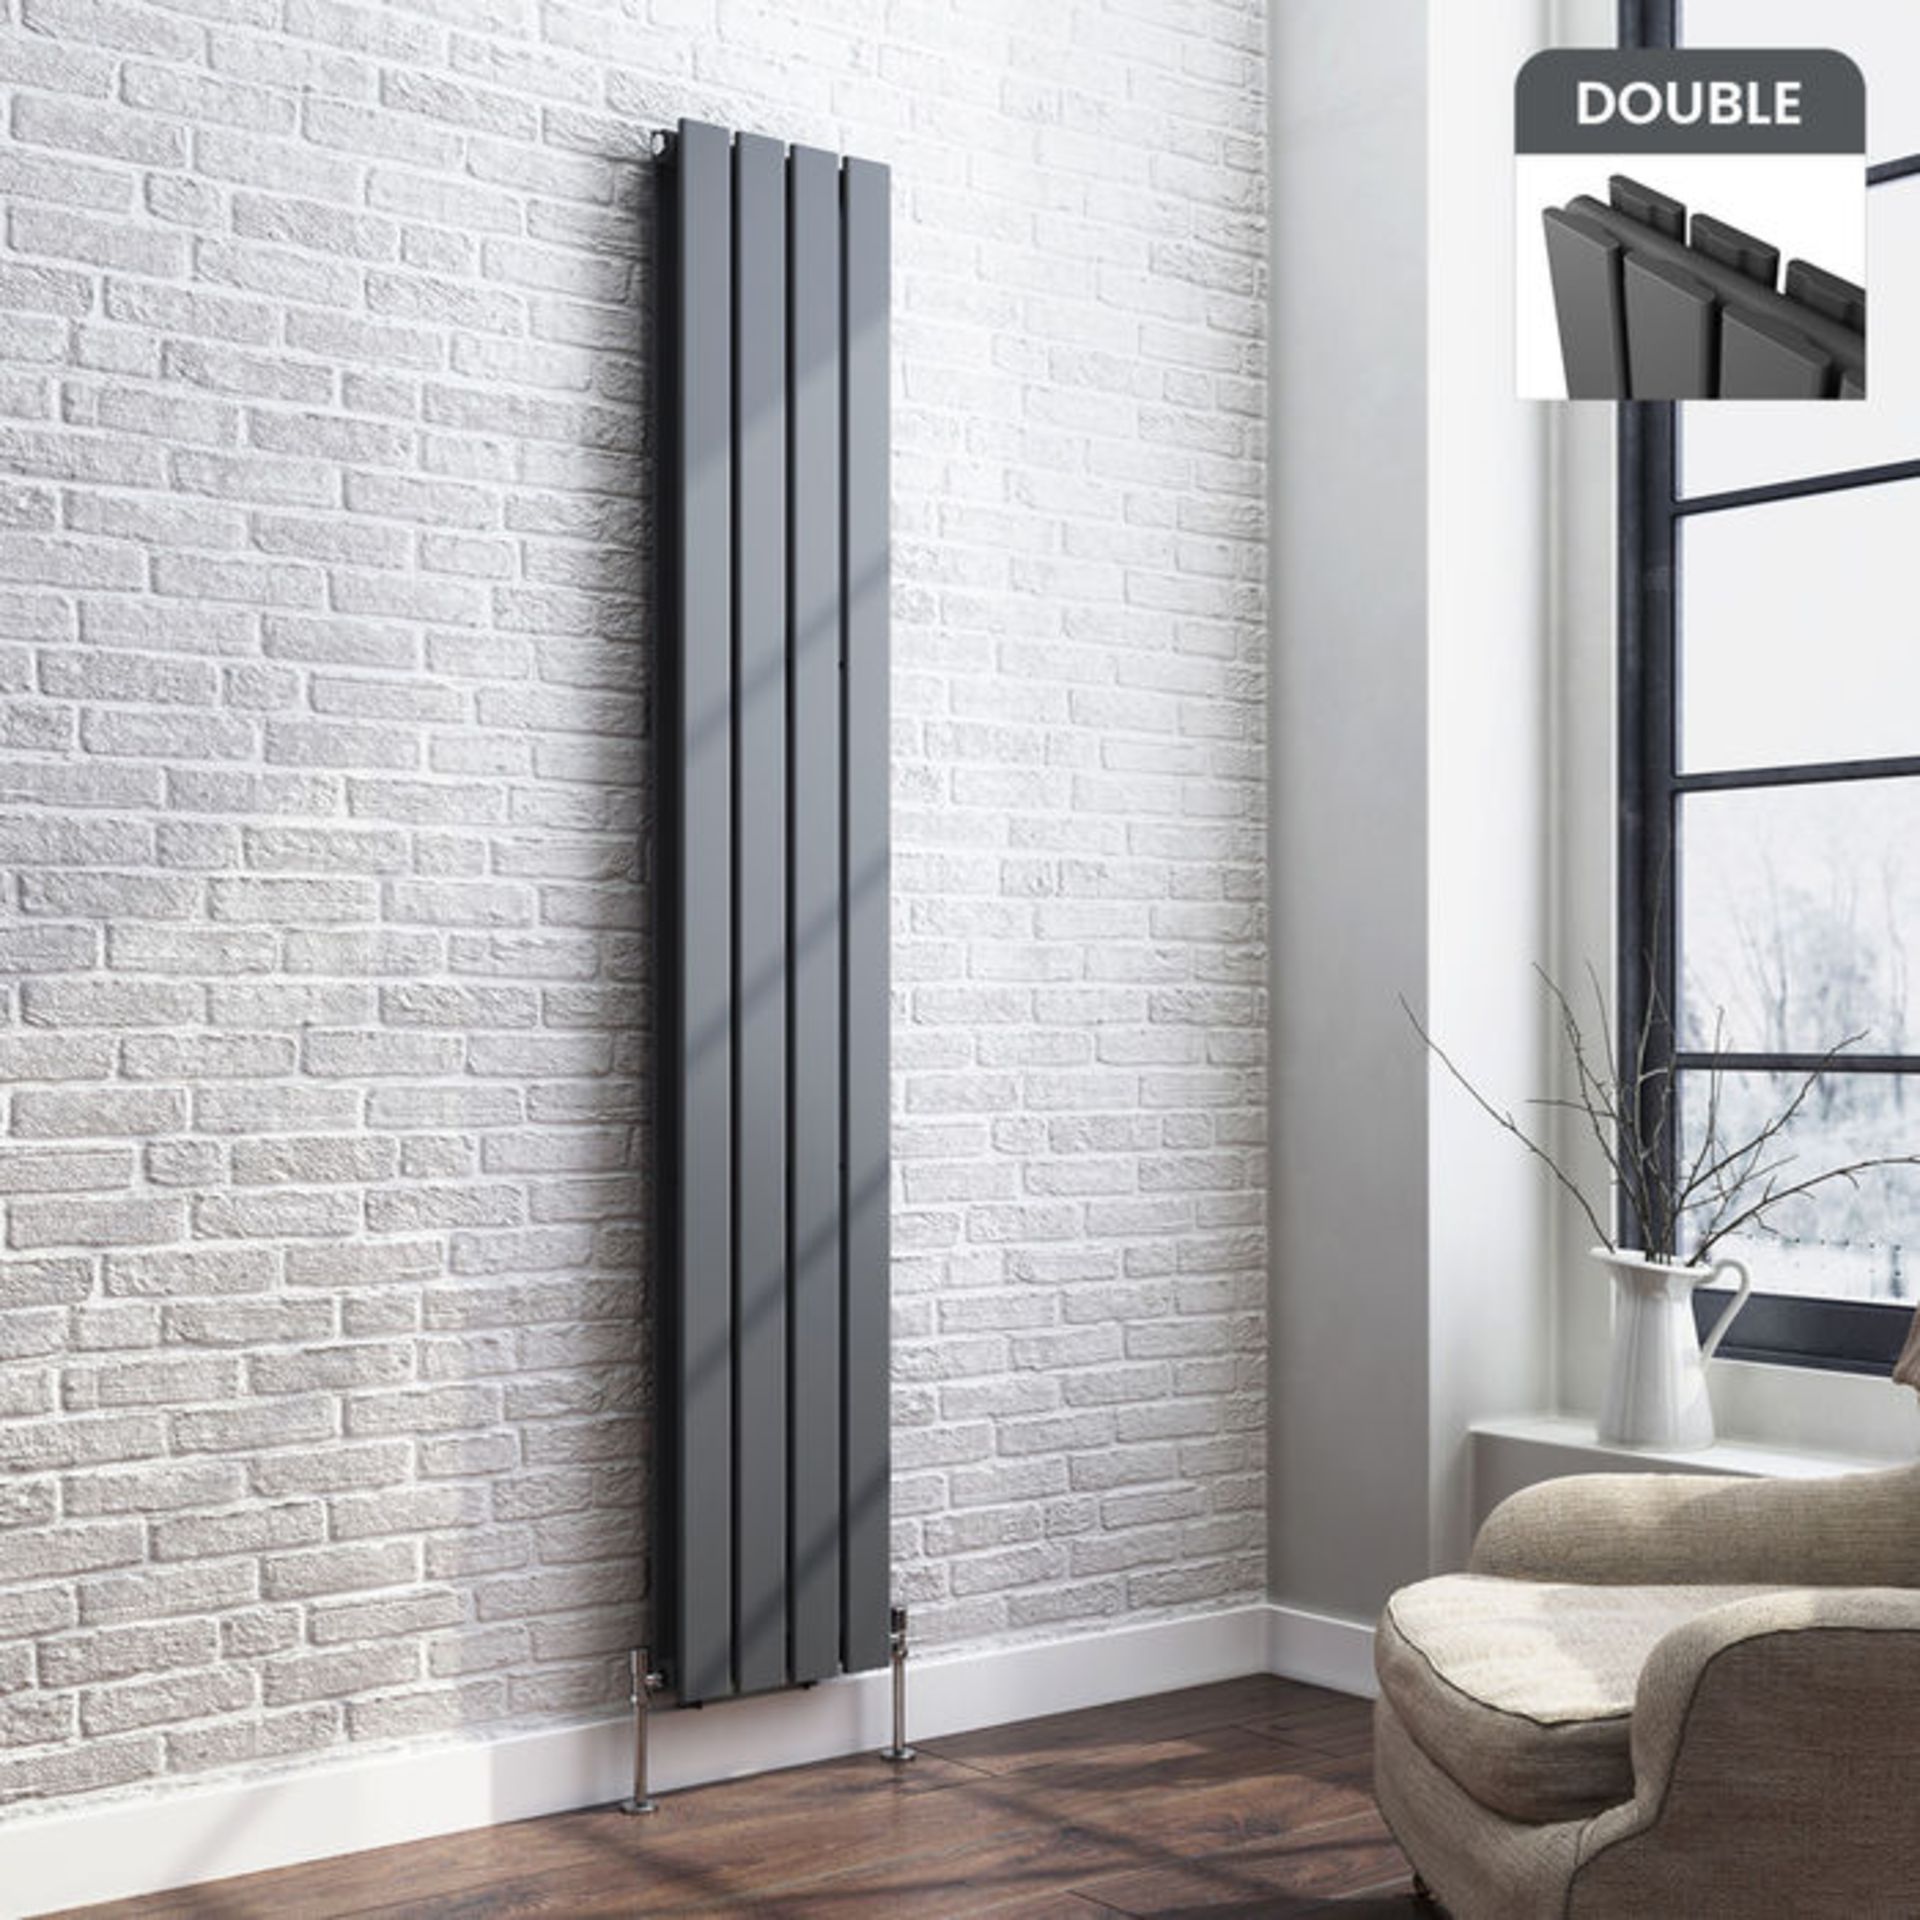 (Z93) 1800x300mm Anthracite Double Flat Panel Vertical Radiator. MRRP £499.99. Made with low